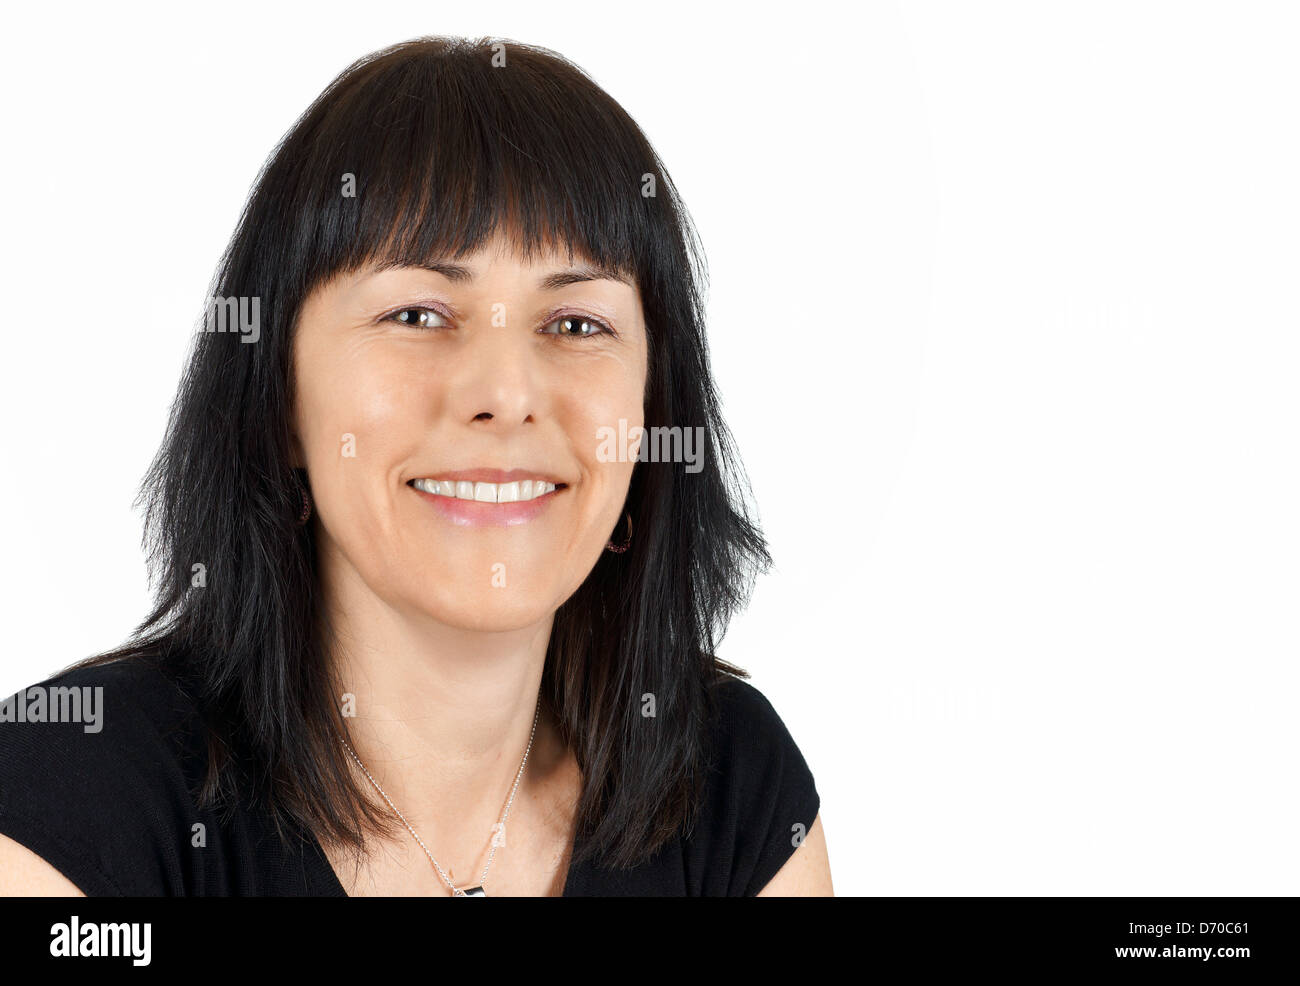 Portrait of smiling middle aged woman Stock Photo